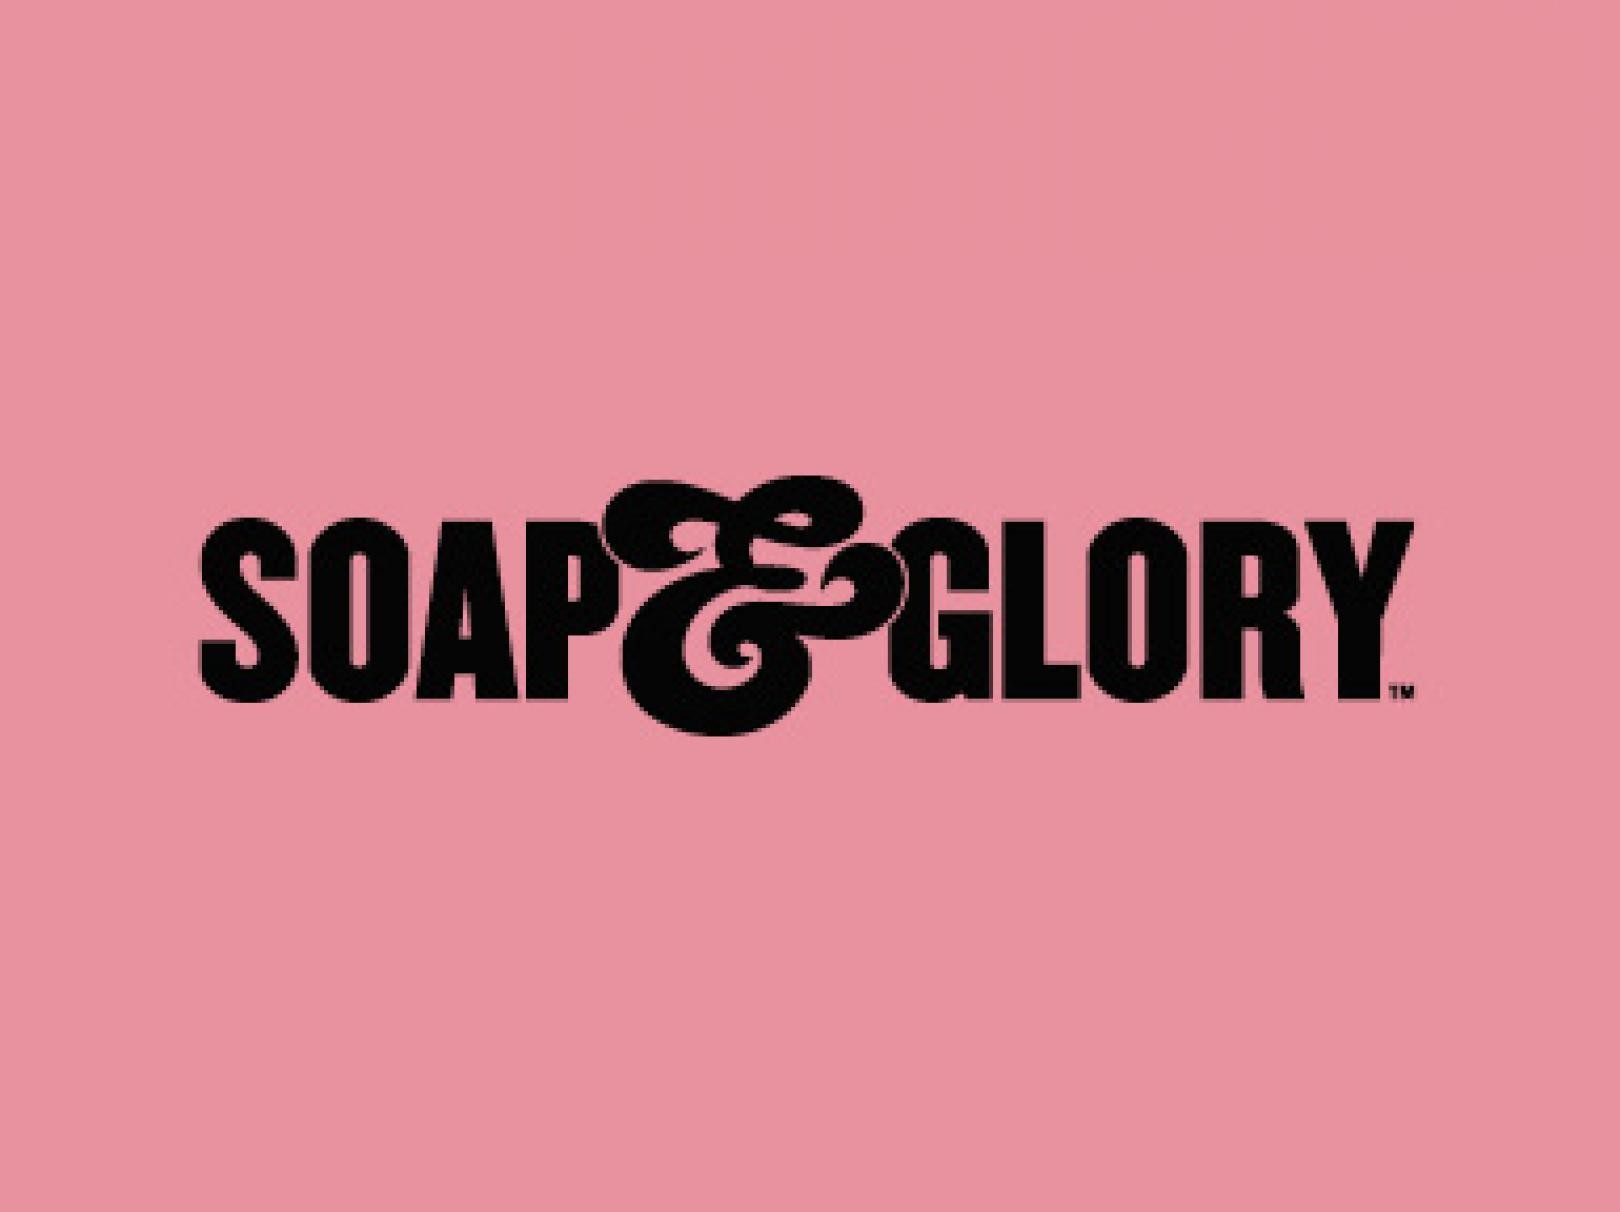 Soap and Glory Logo on Pink Background